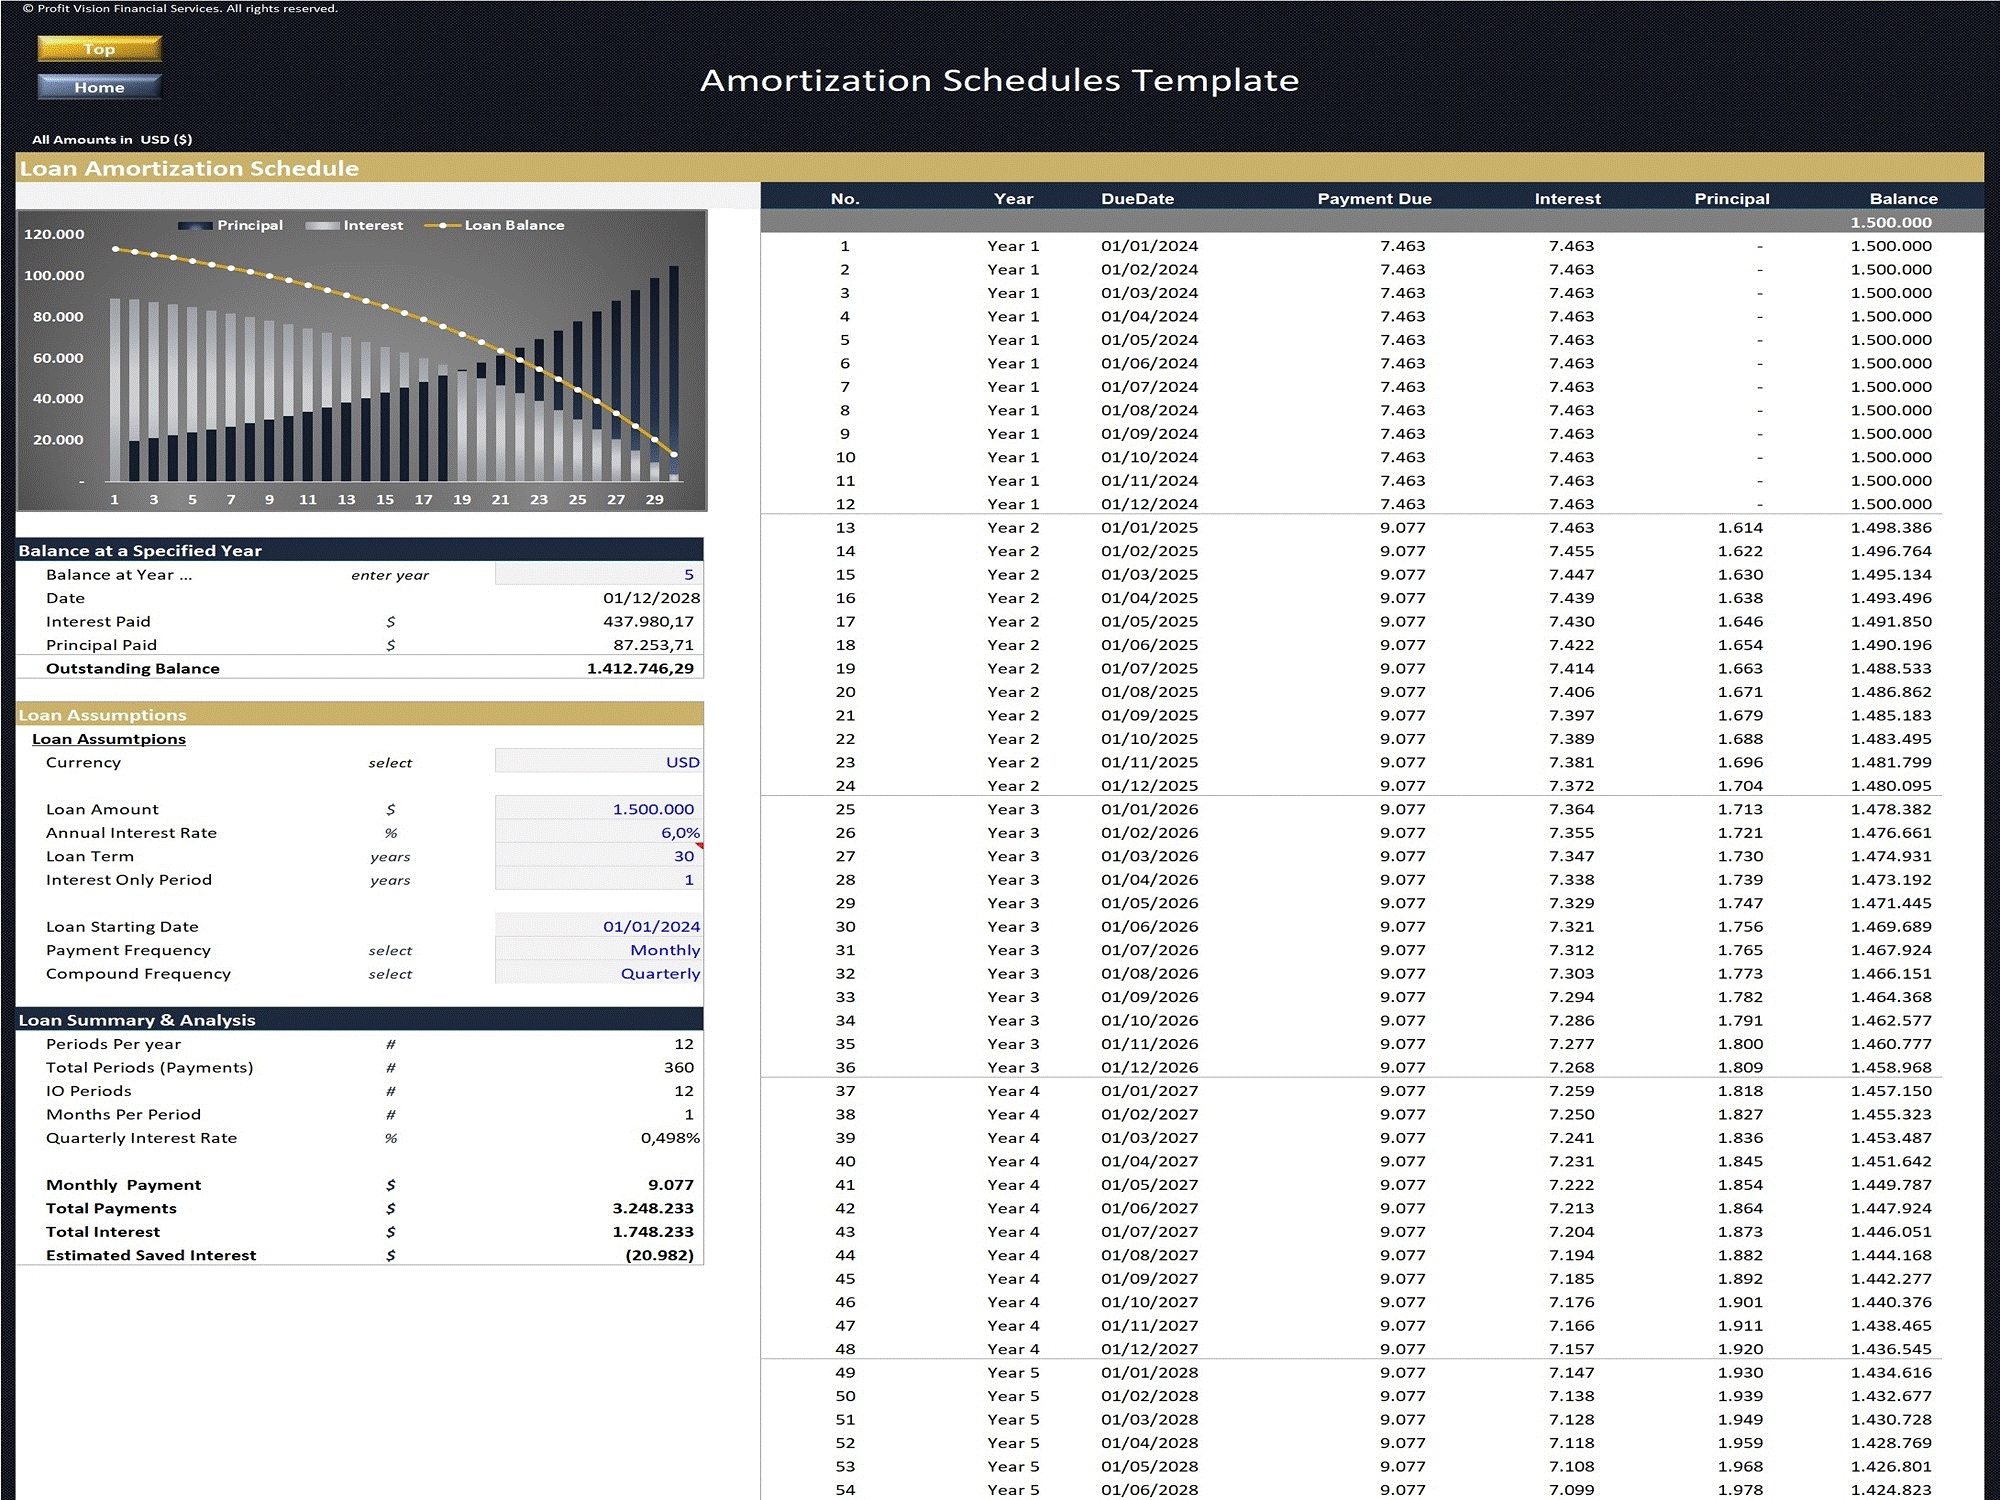 Amortization Schedules (Loans, Mortgages, LC, Bonds, Leases) (Excel template (XLSB)) Preview Image